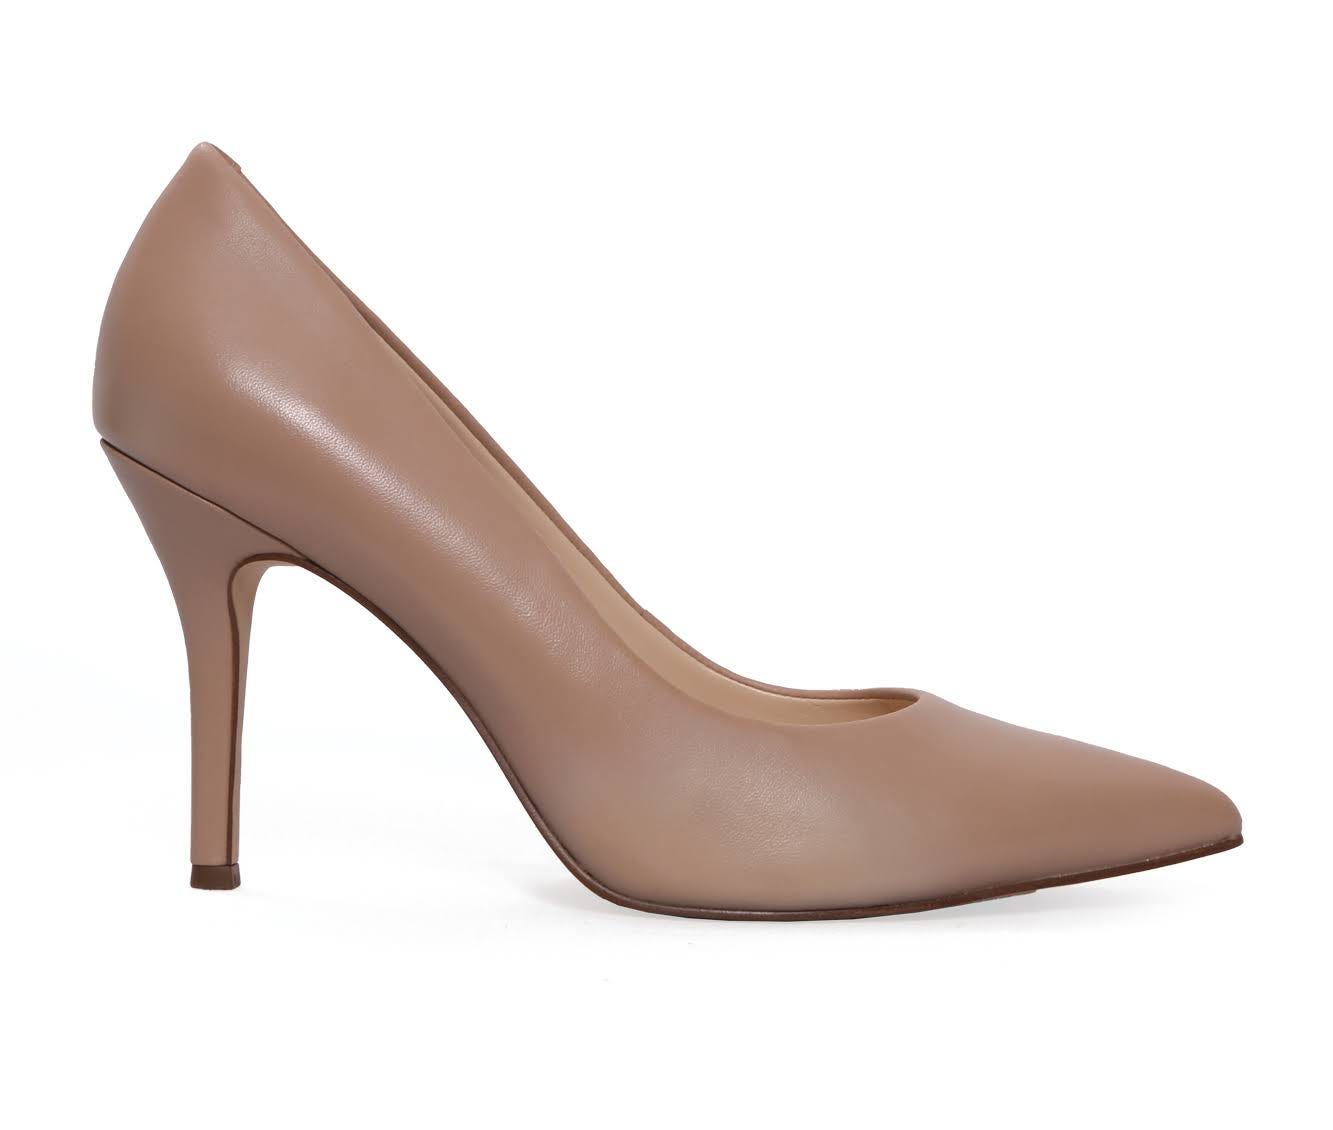 Sophisticated Nine West Flax Pump Shoes in Nude Leather | Image